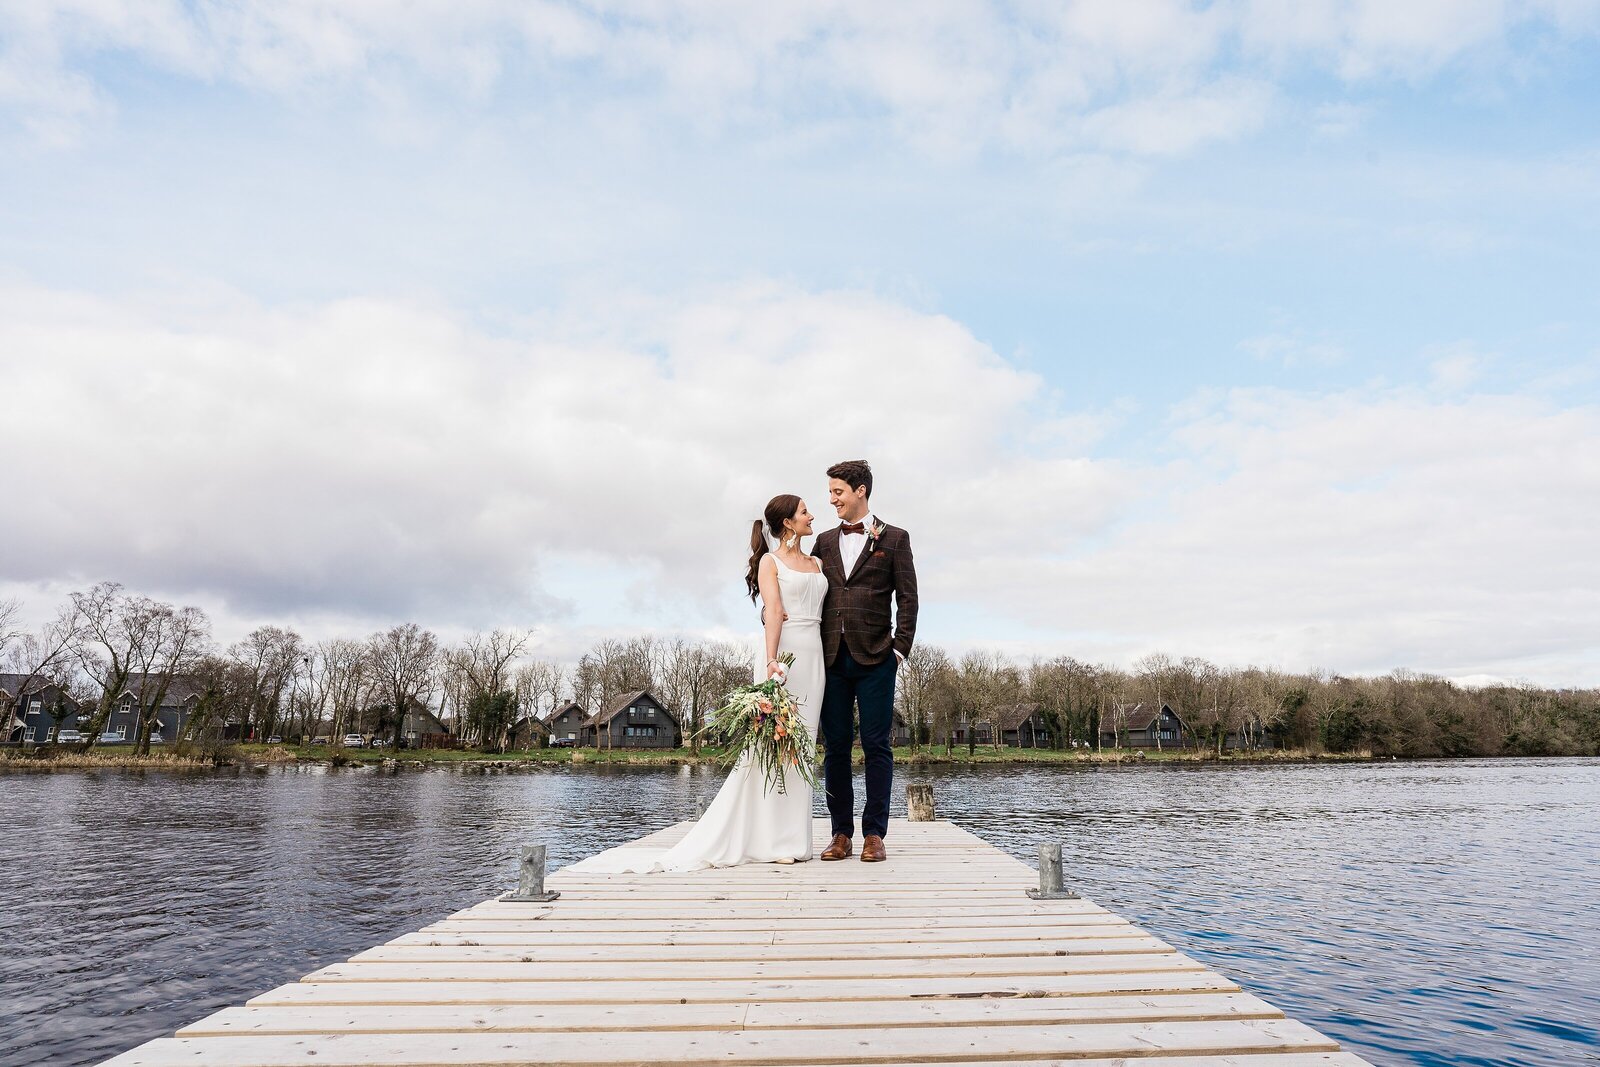 Relaxed Spring Outdoor Lusty Beg Wedding Photographer NI (2)